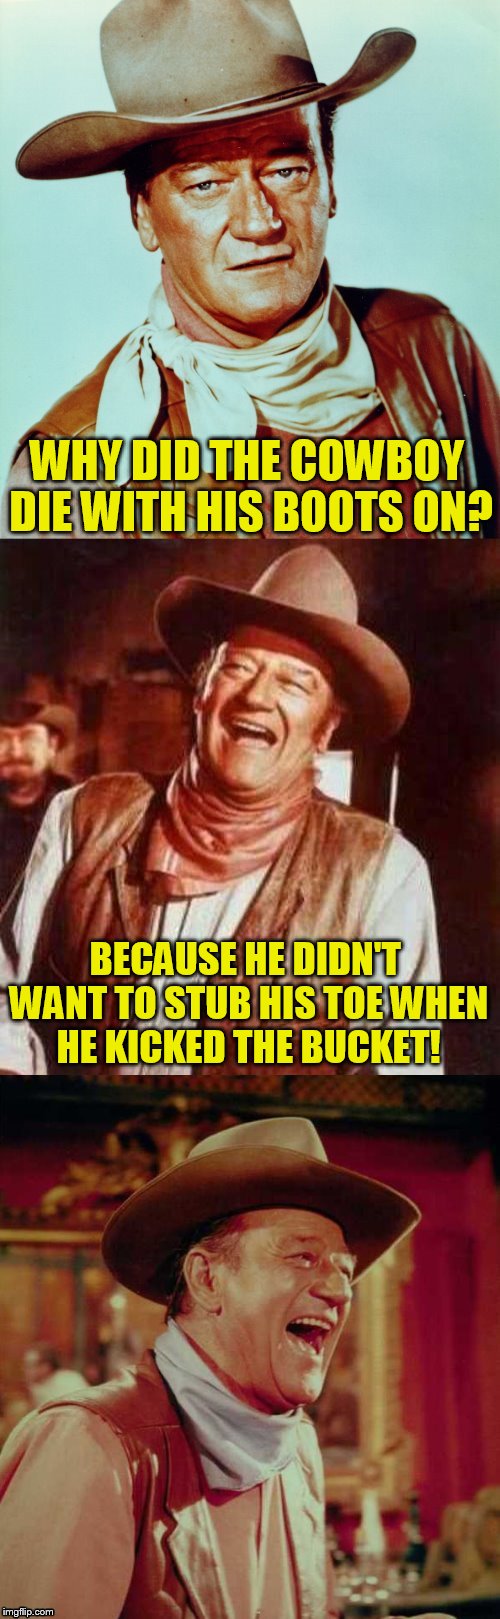 John Wayne Puns (With The Re-Caption Link) | WHY DID THE COWBOY DIE WITH HIS BOOTS ON? BECAUSE HE DIDN'T WANT TO STUB HIS TOE WHEN HE KICKED THE BUCKET! | image tagged in john wayne puns,memes,john wayne,jokes,cowboys,funny memes | made w/ Imgflip meme maker